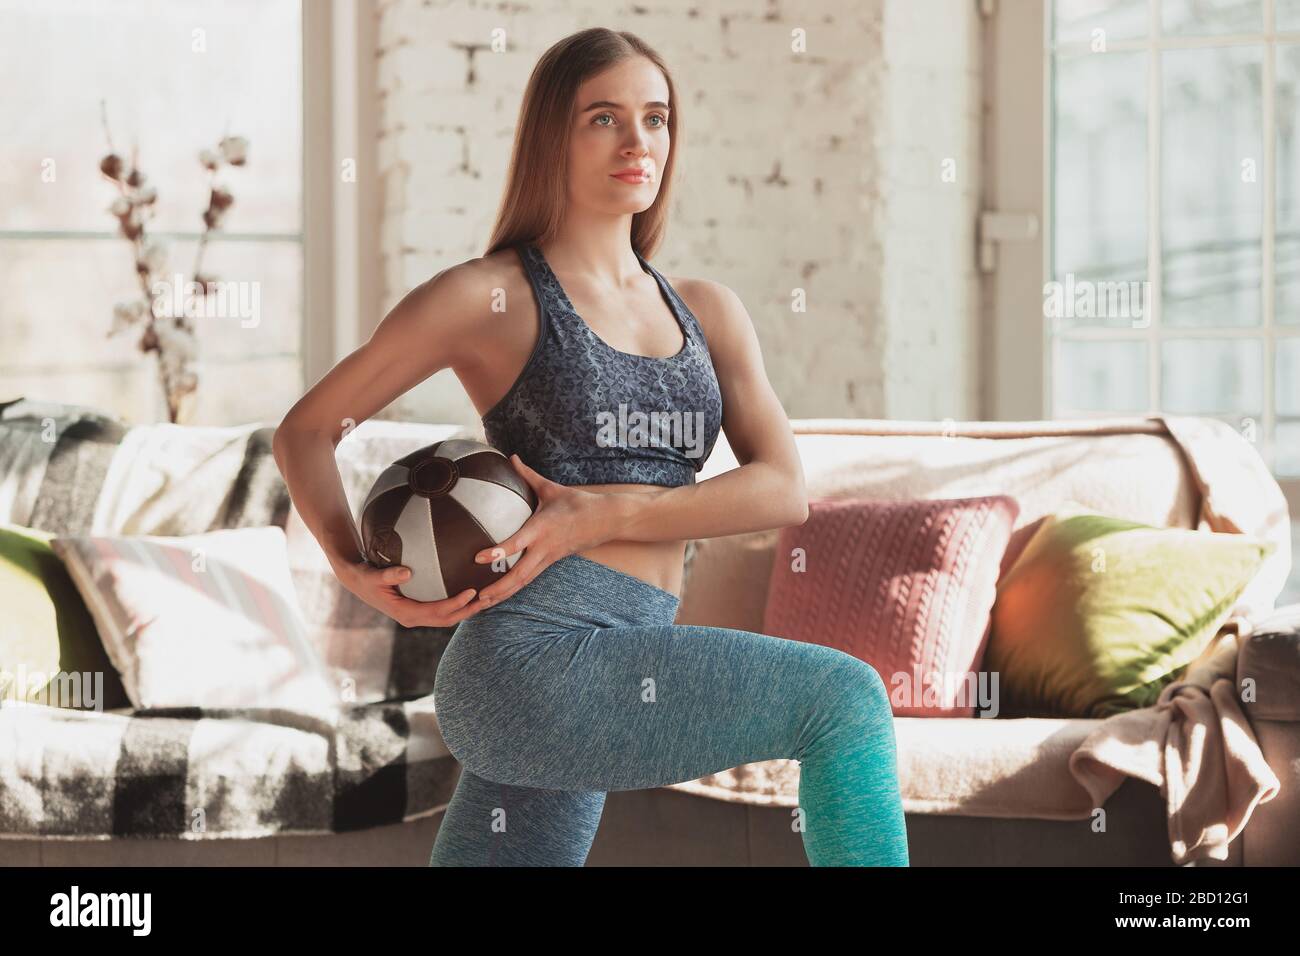 Young woman teaching at home online courses of fitness, aerobic, sporty lifestyle while quarantine. Getting active while isolated, wellness, movement concept. Exercises with ball for lower, upper body. Stock Photo